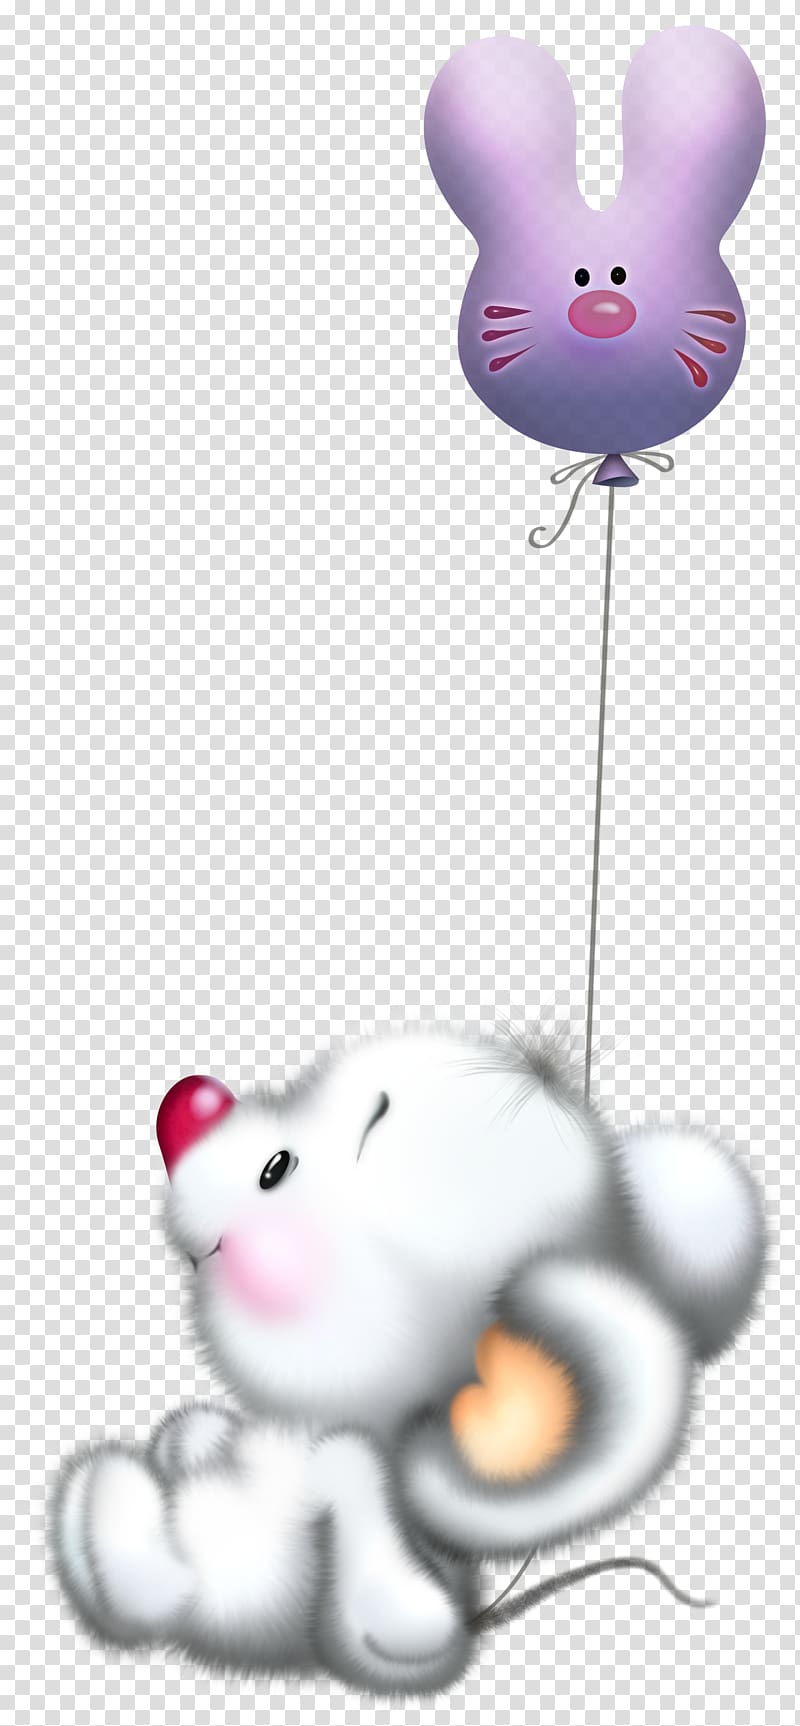 white mouse holding purple bunny balloon illustration, Computer mouse Cartoon , Cute White Mouse with Balloon Cartoon Free transparent background PNG clipart